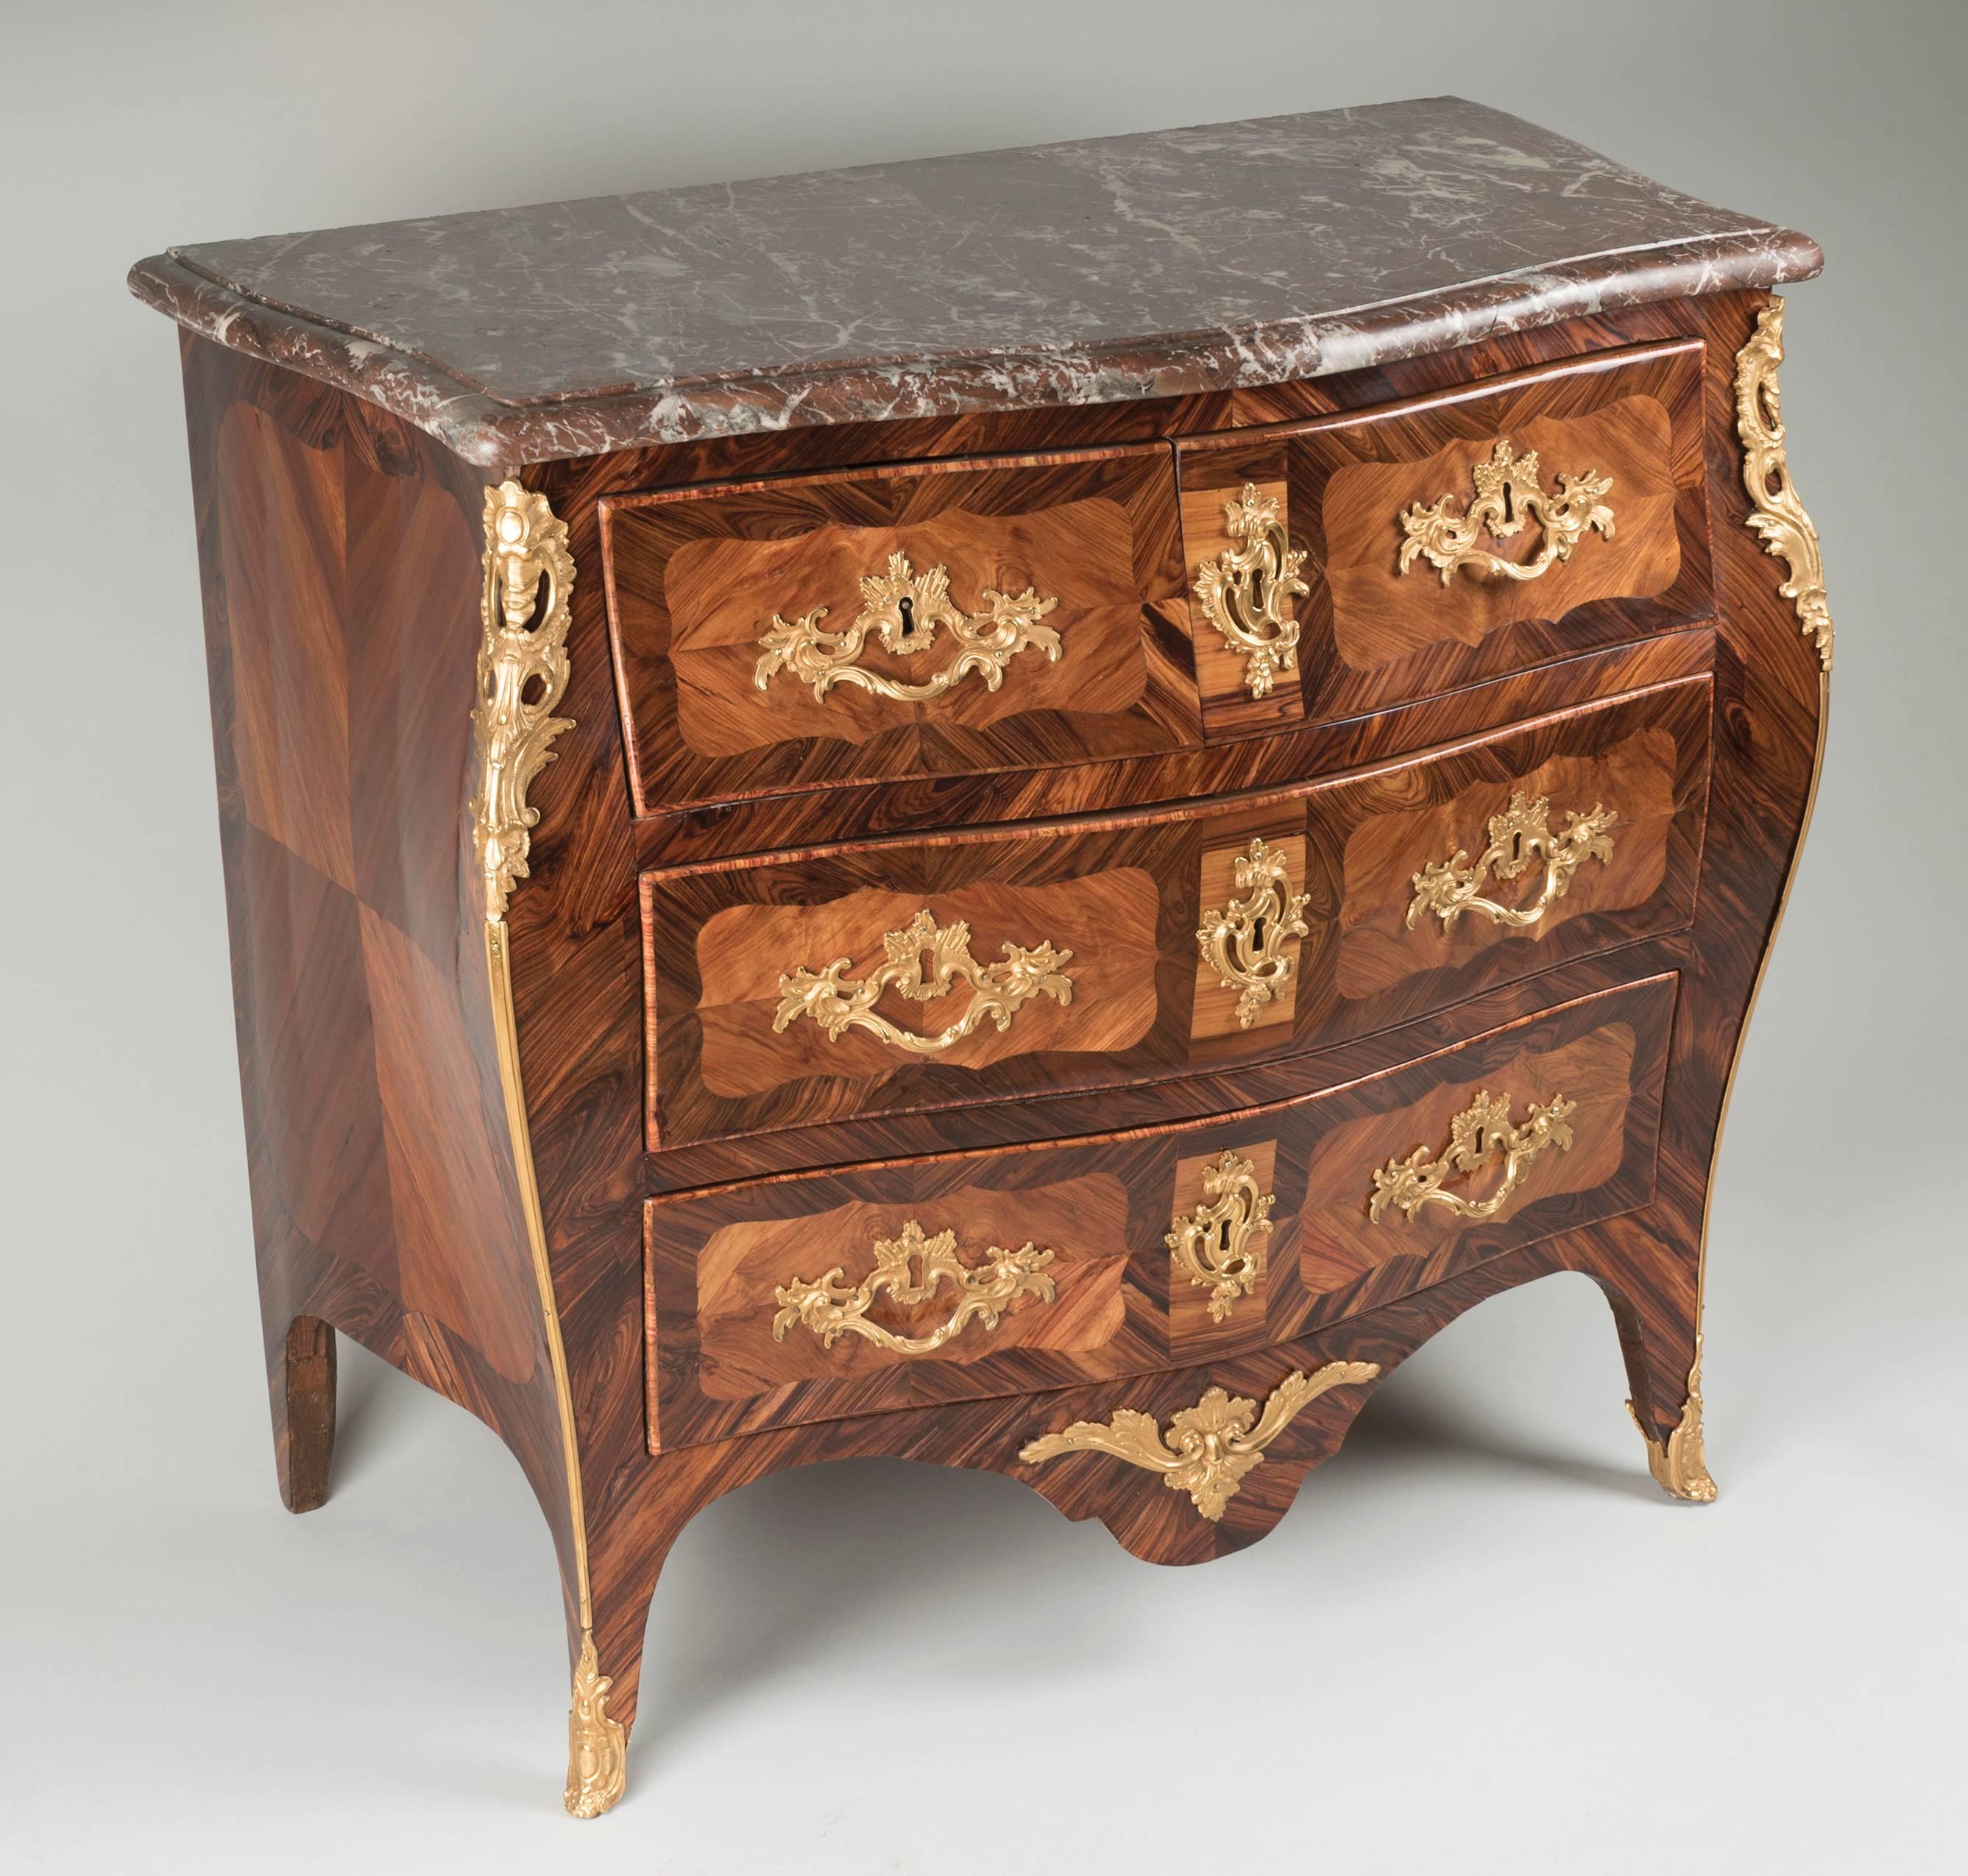 Kingwood and tulipwood curved commode with chiseled gilt bronze

Parisian work from the Louis XV period stamped by Leonard Boudin, reçu maître on march 4th 1761